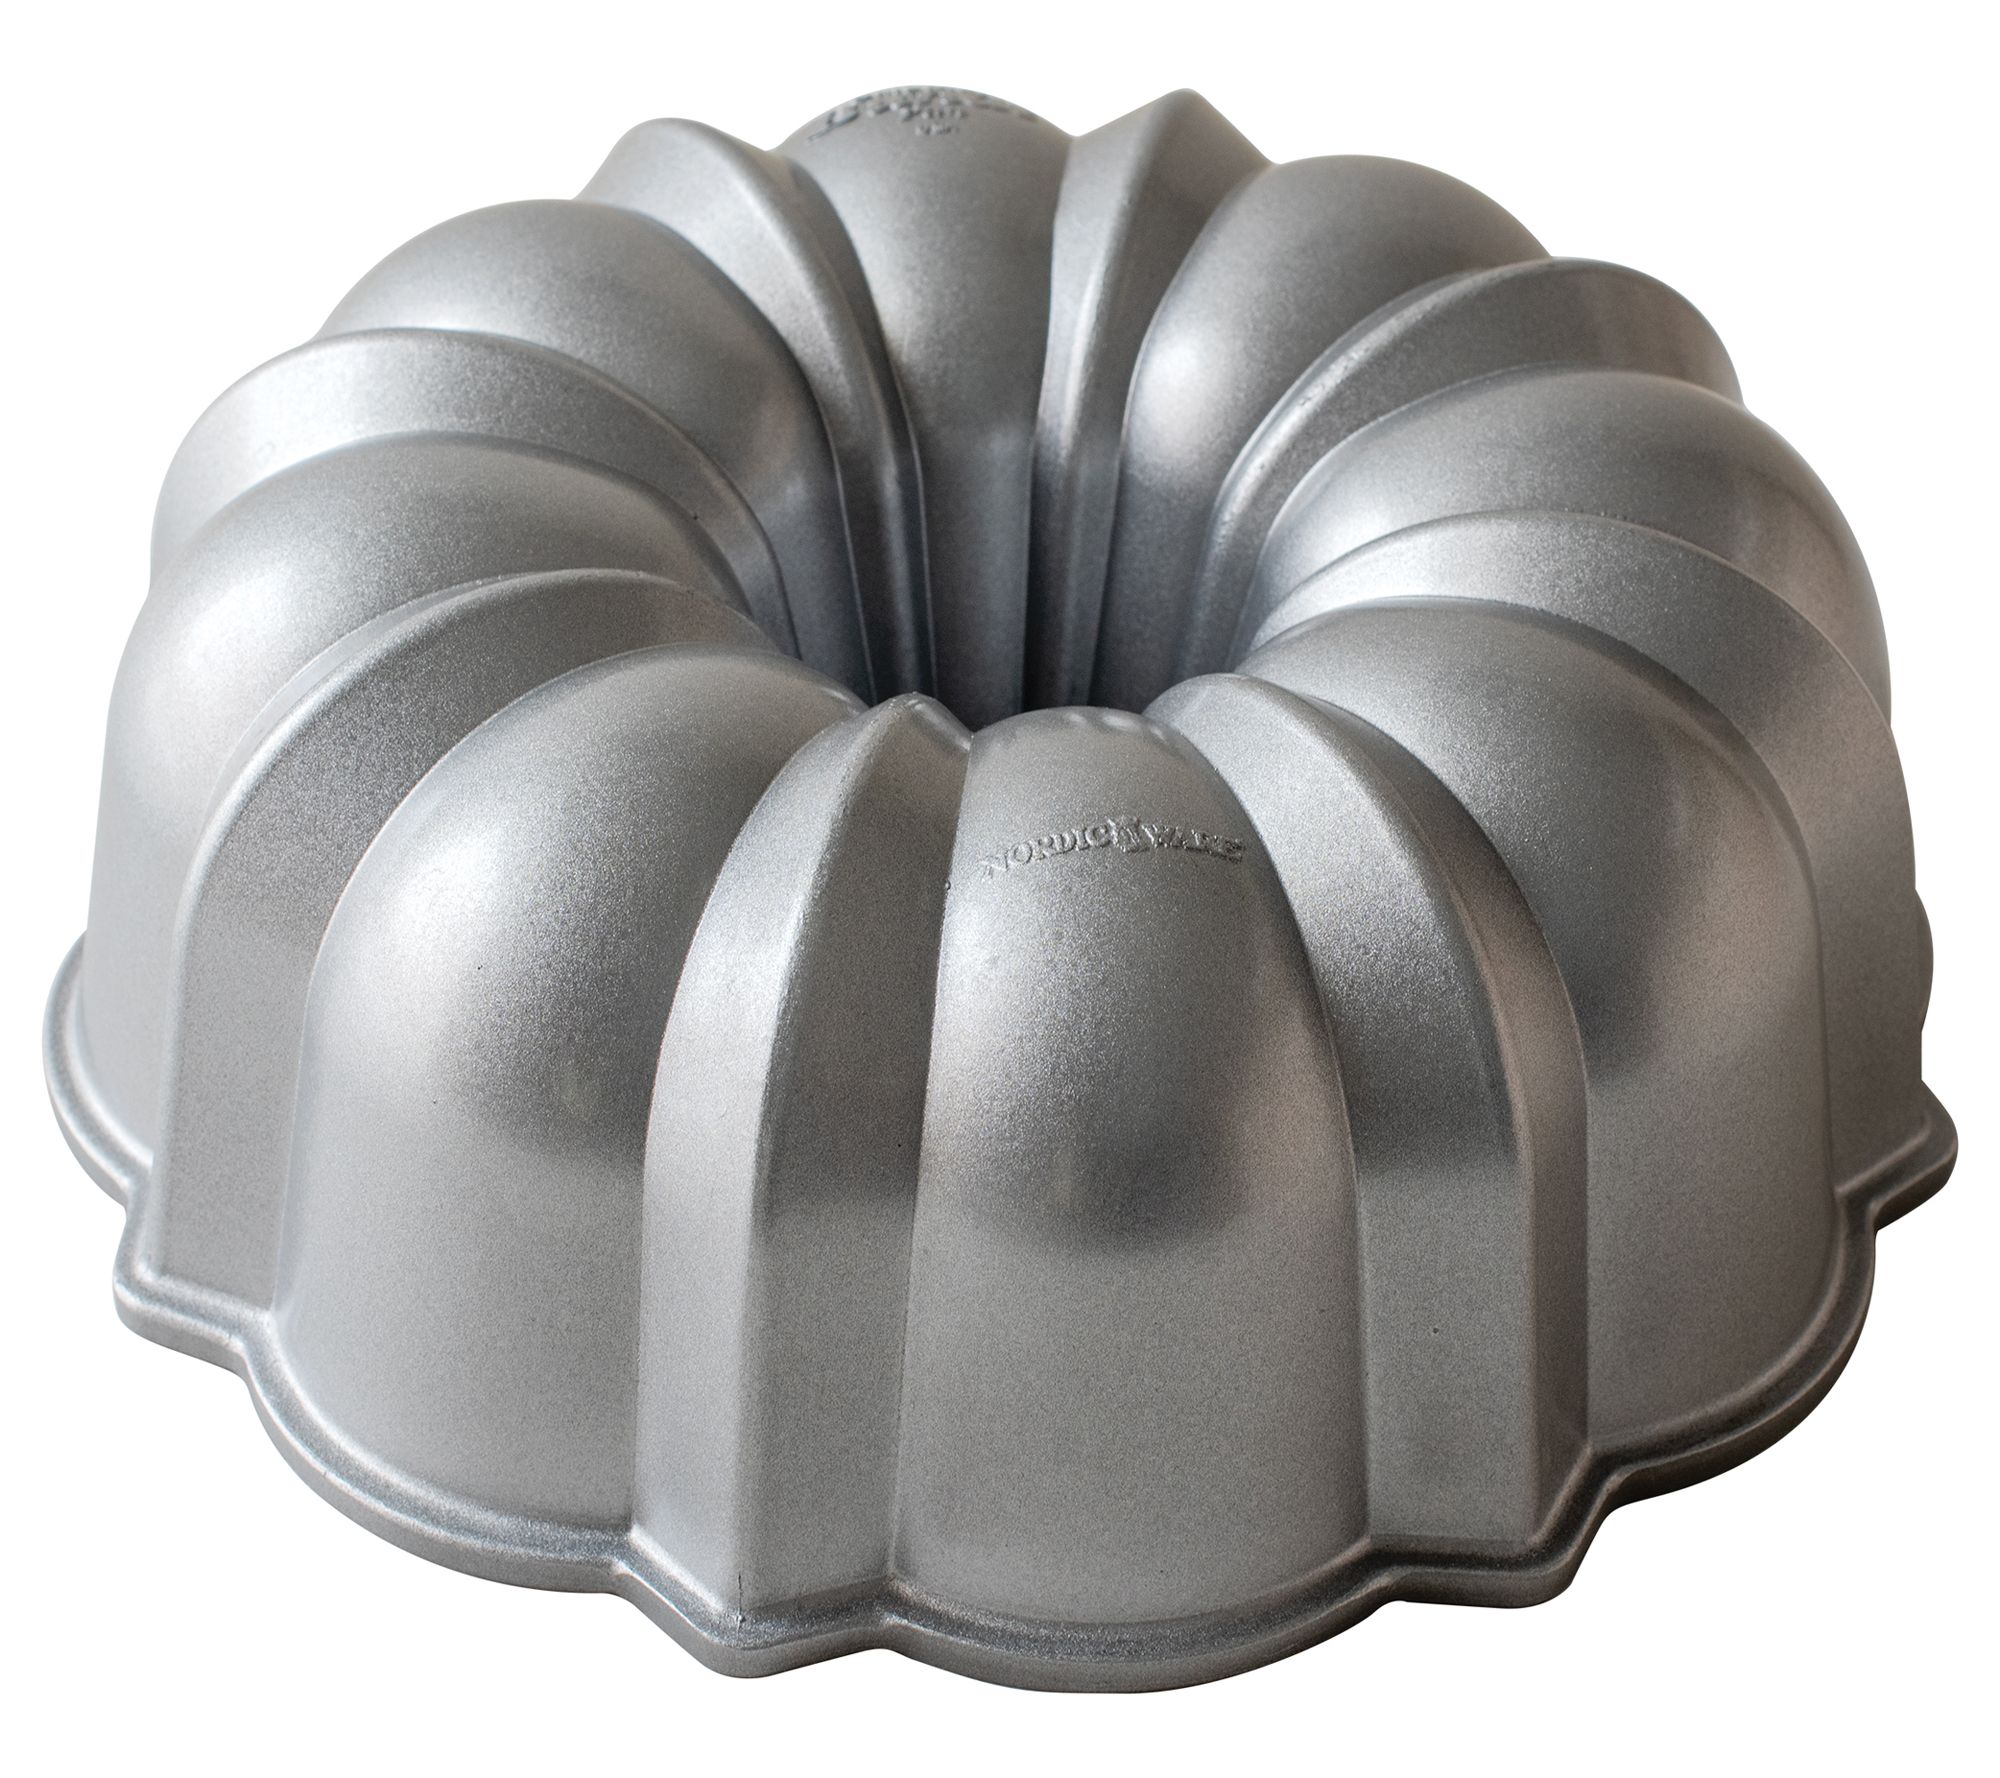 Nordic Ware 2-Piece Tiered Bundt Pan Set, 6 and 12-Cup